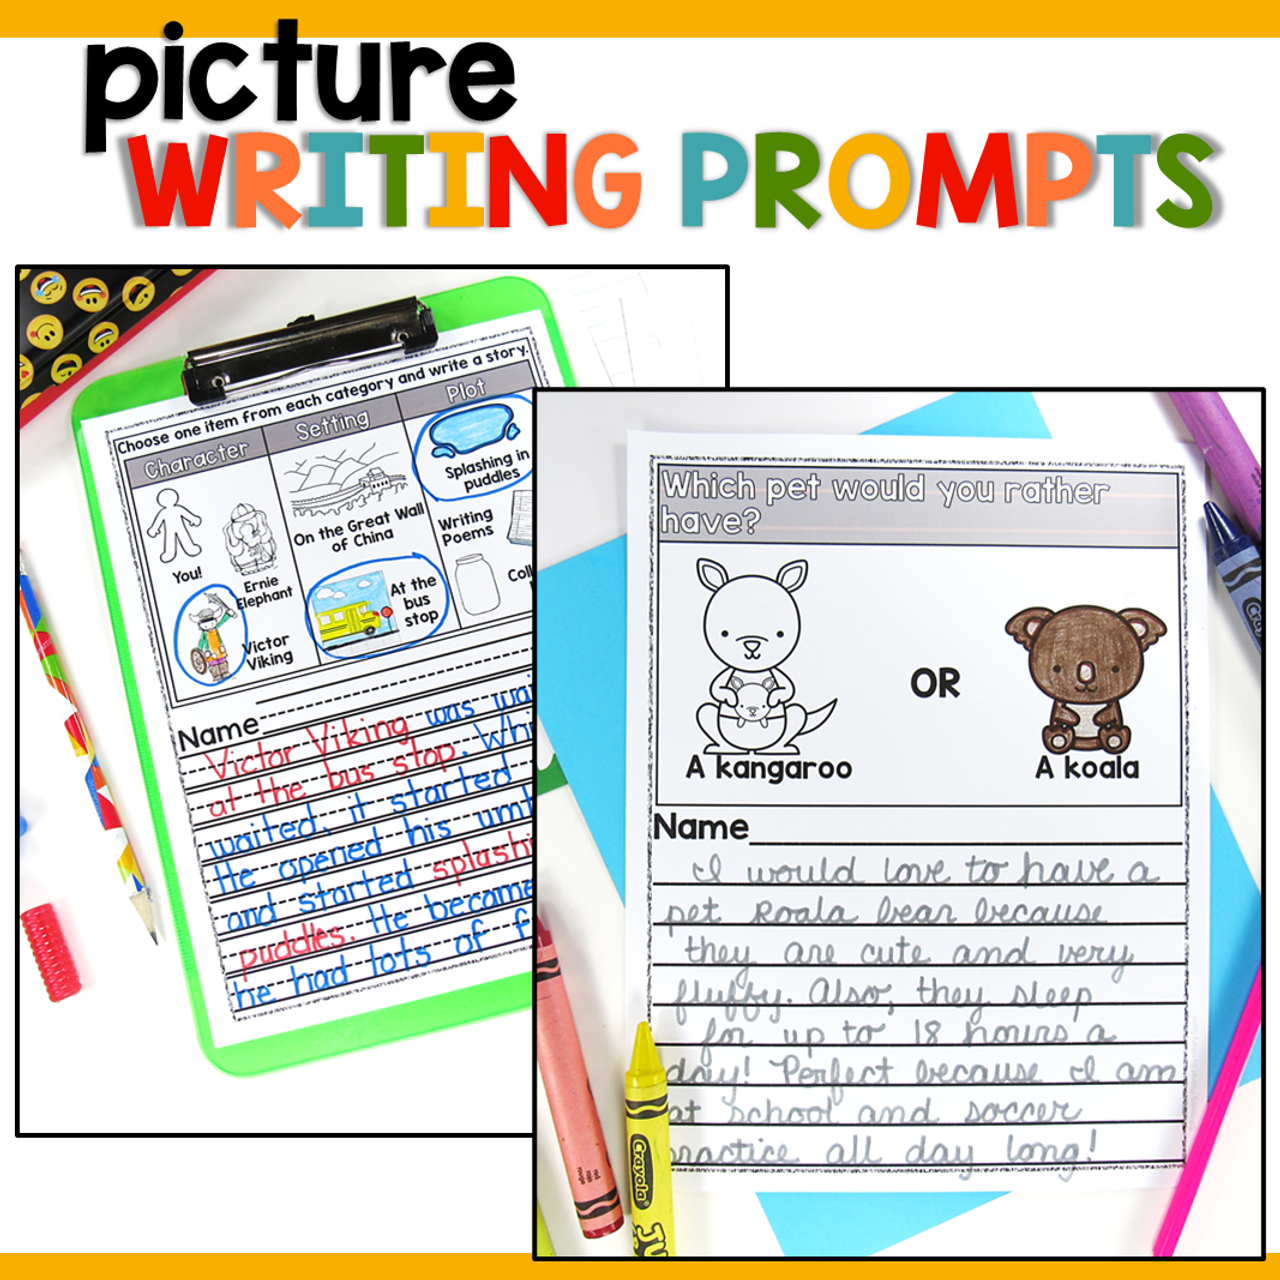 Spring Writing Prompts with Pictures - April Writing Prompts